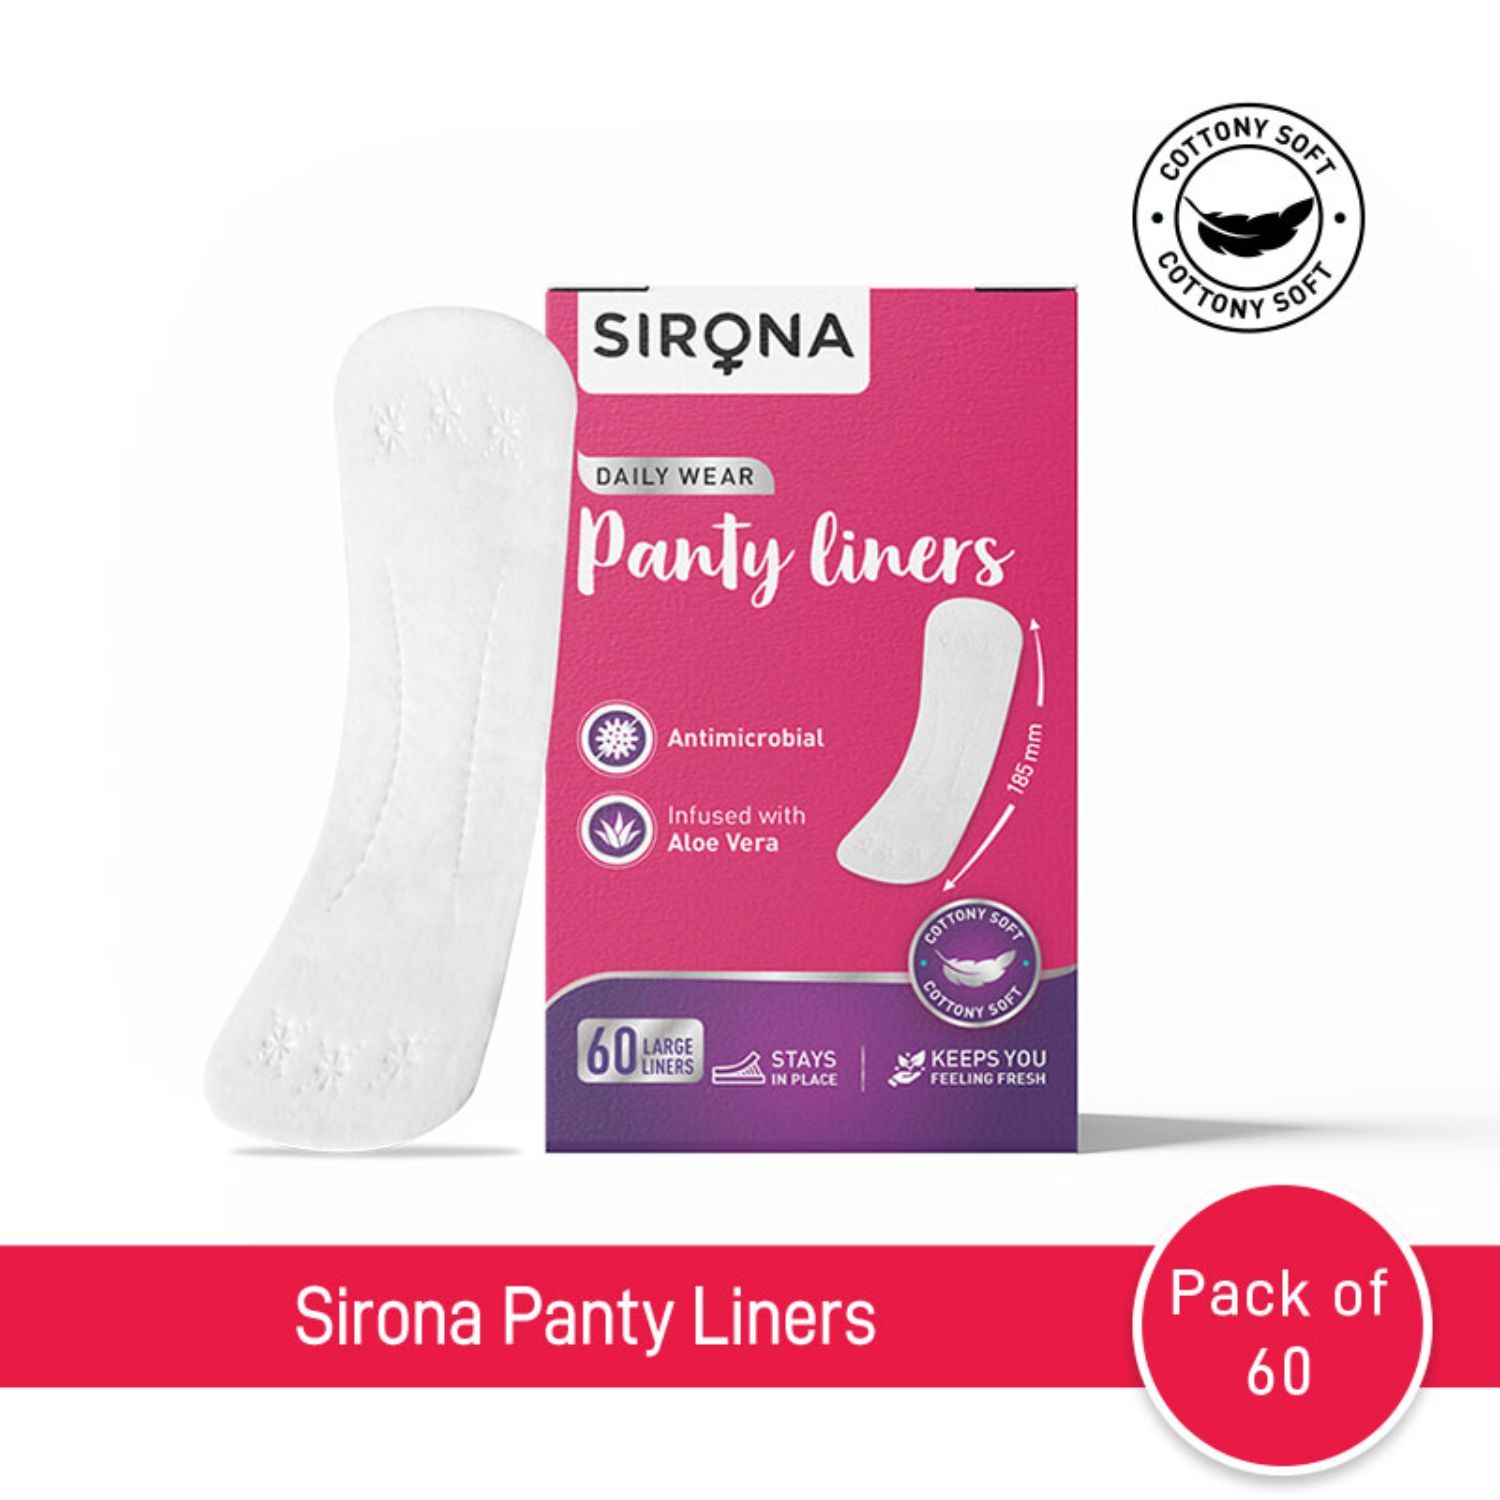 Panty Liners Large